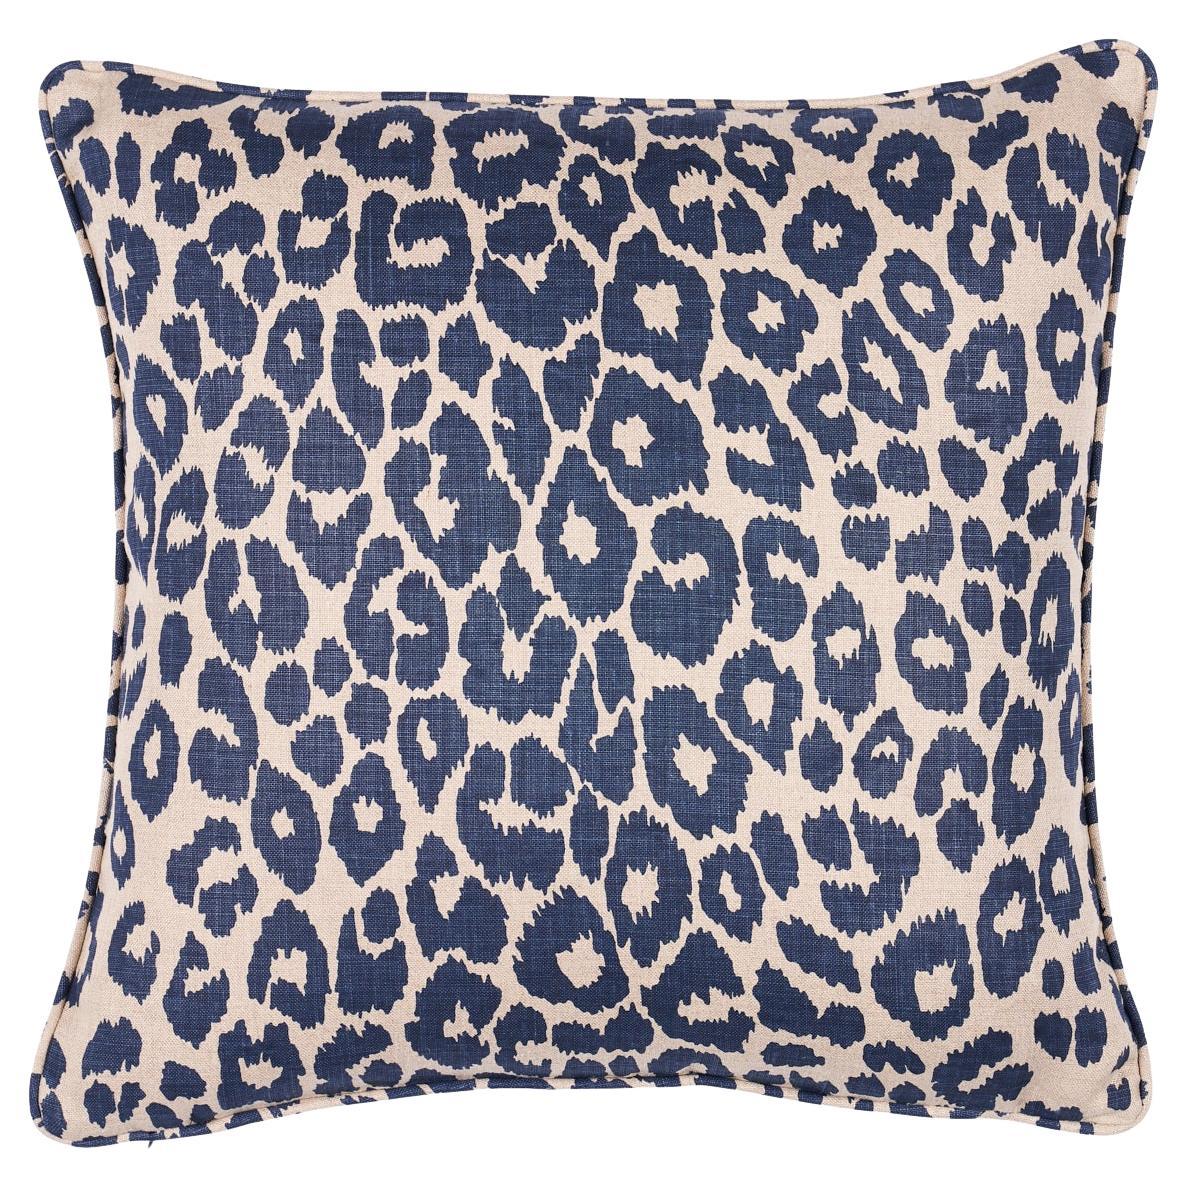 Schumacher Iconic Leopard 18" Pillow in Ink/Natural